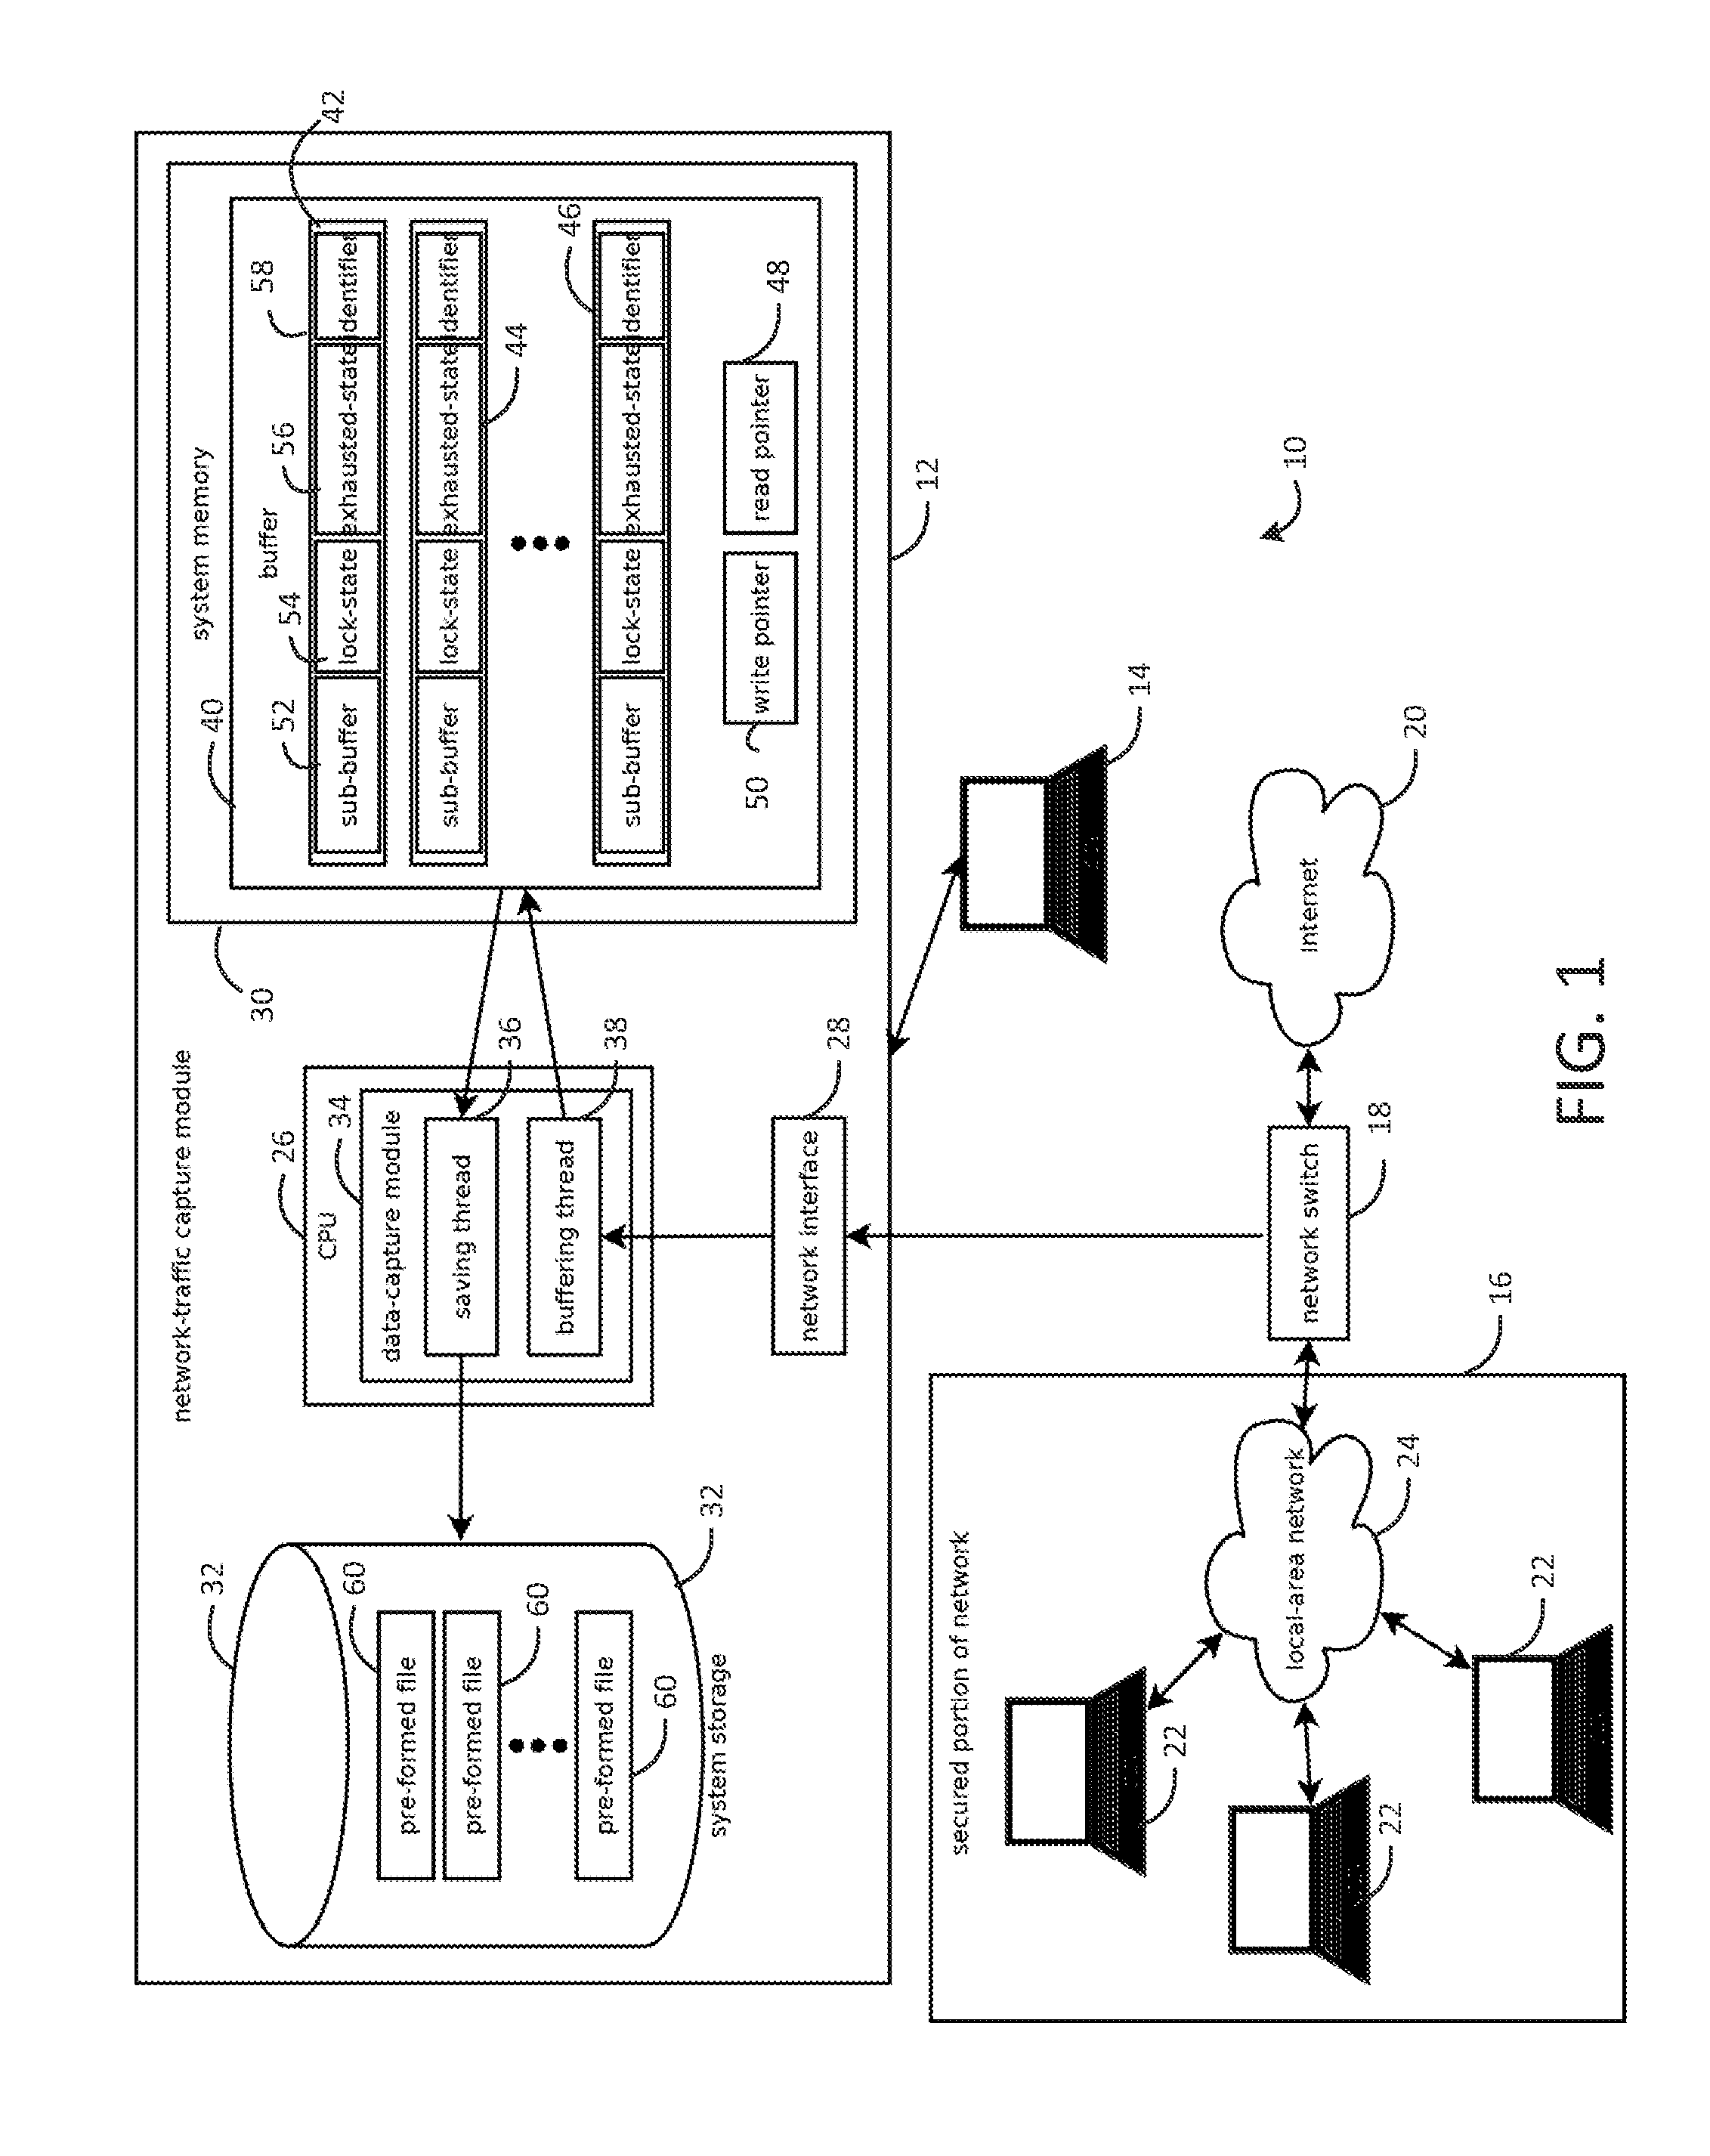 Systems and methods for capturing, replaying, or analyzing time-series data